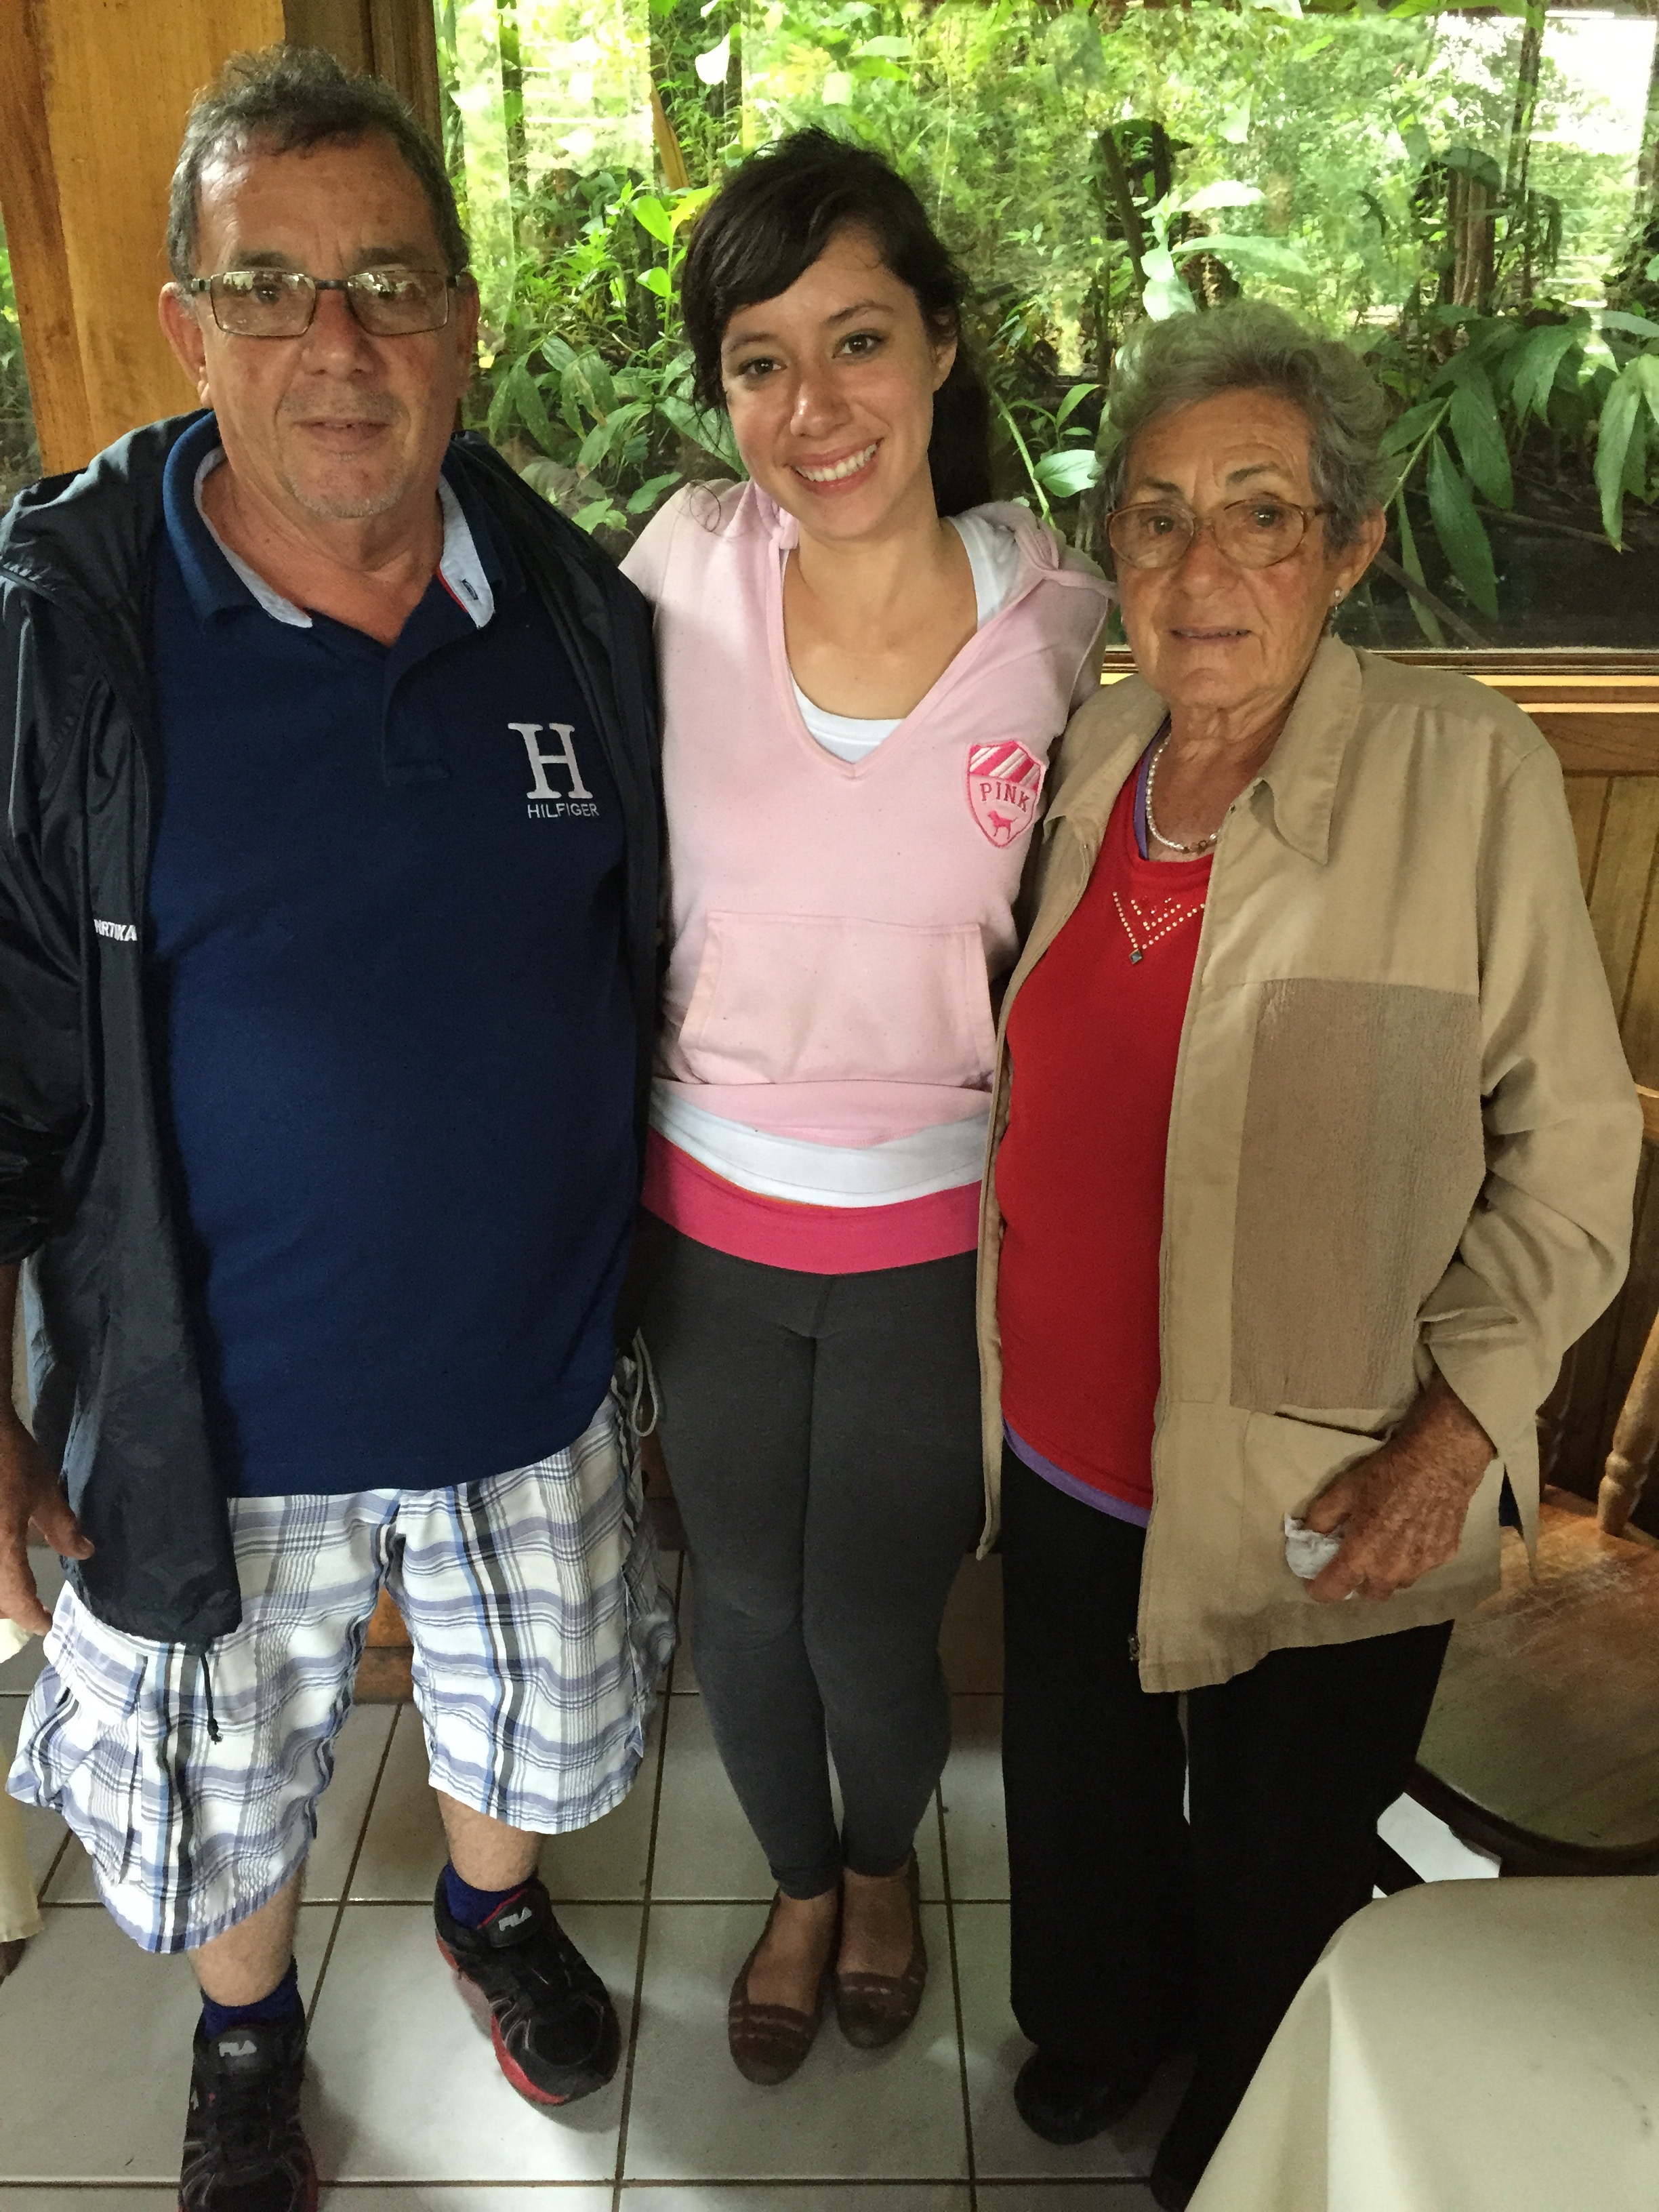 I was lucky enough to get a picture with the son and wife of Alberto Granado. His son, who shares the same name, Alberto Granado, is to my left, and his wife, Delia Maria, is on my right! They accompanied us to Monteverde!